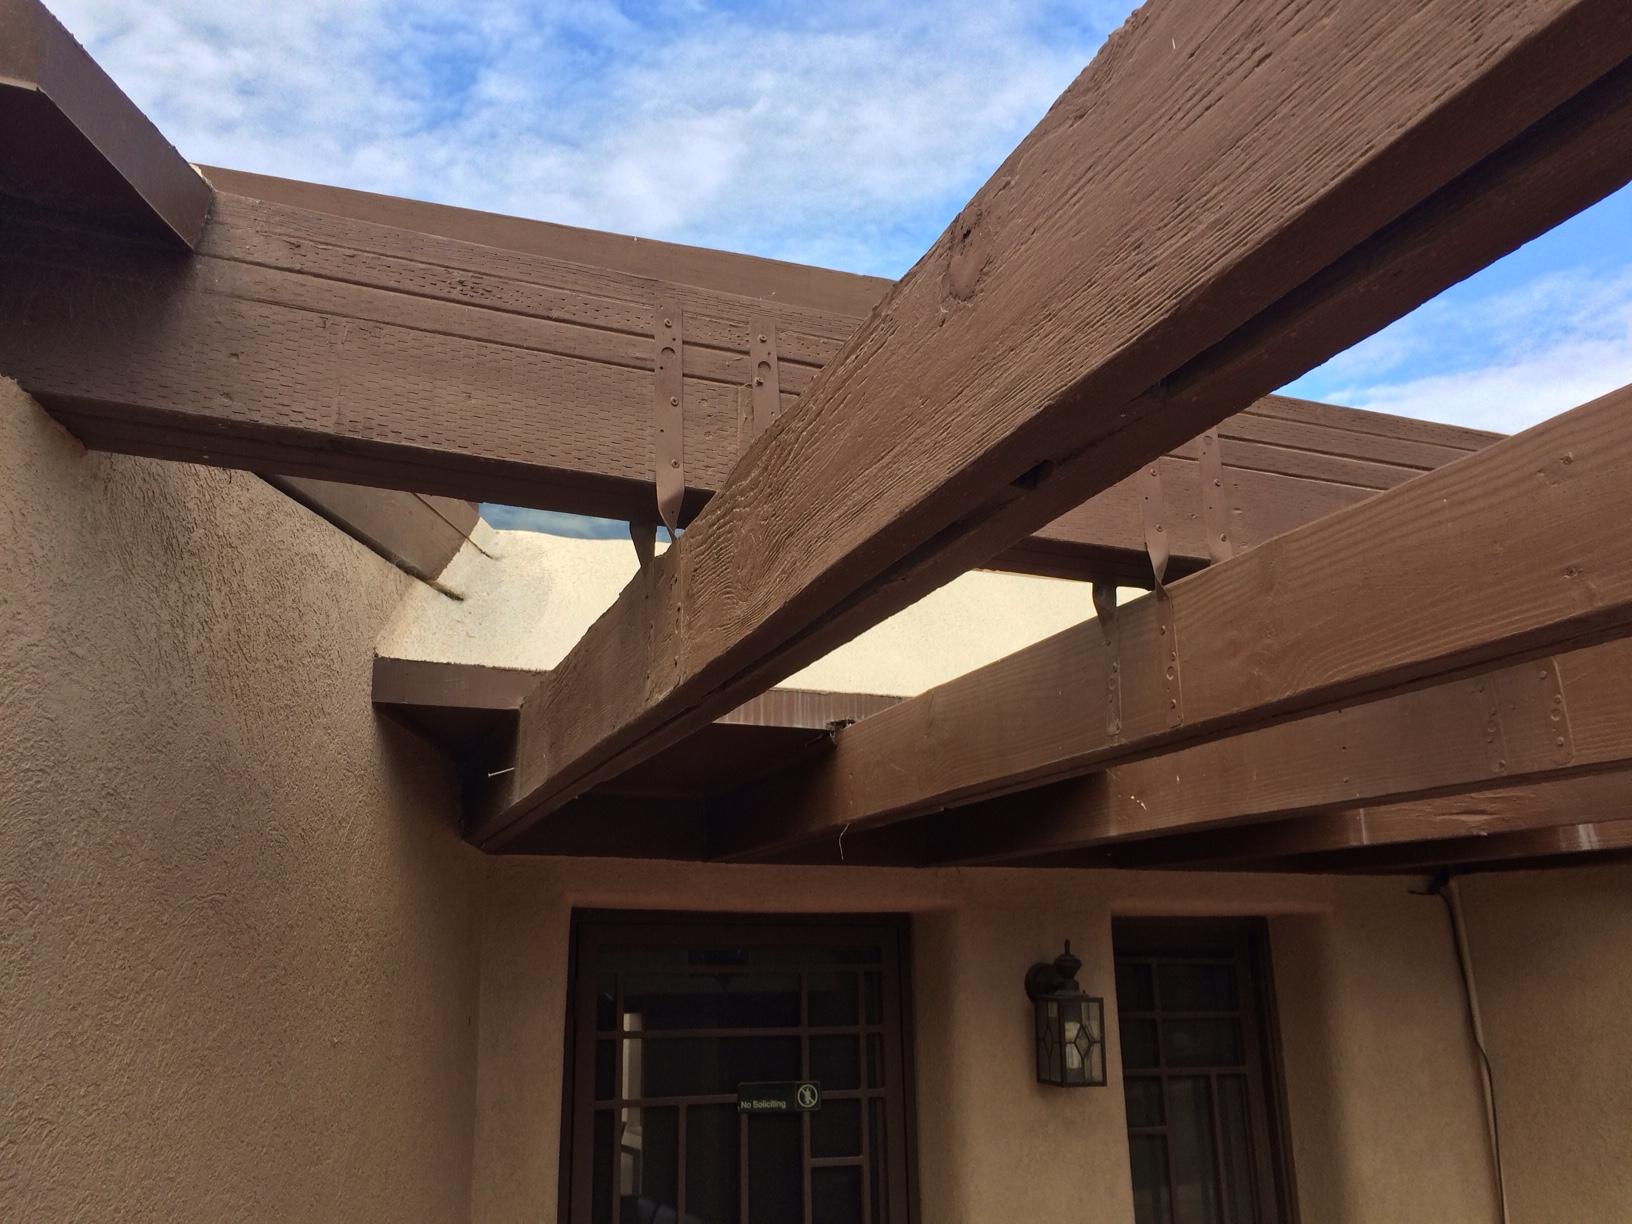 carpentry - Fix sagging beam situation - Home Improvement Stack Exchange